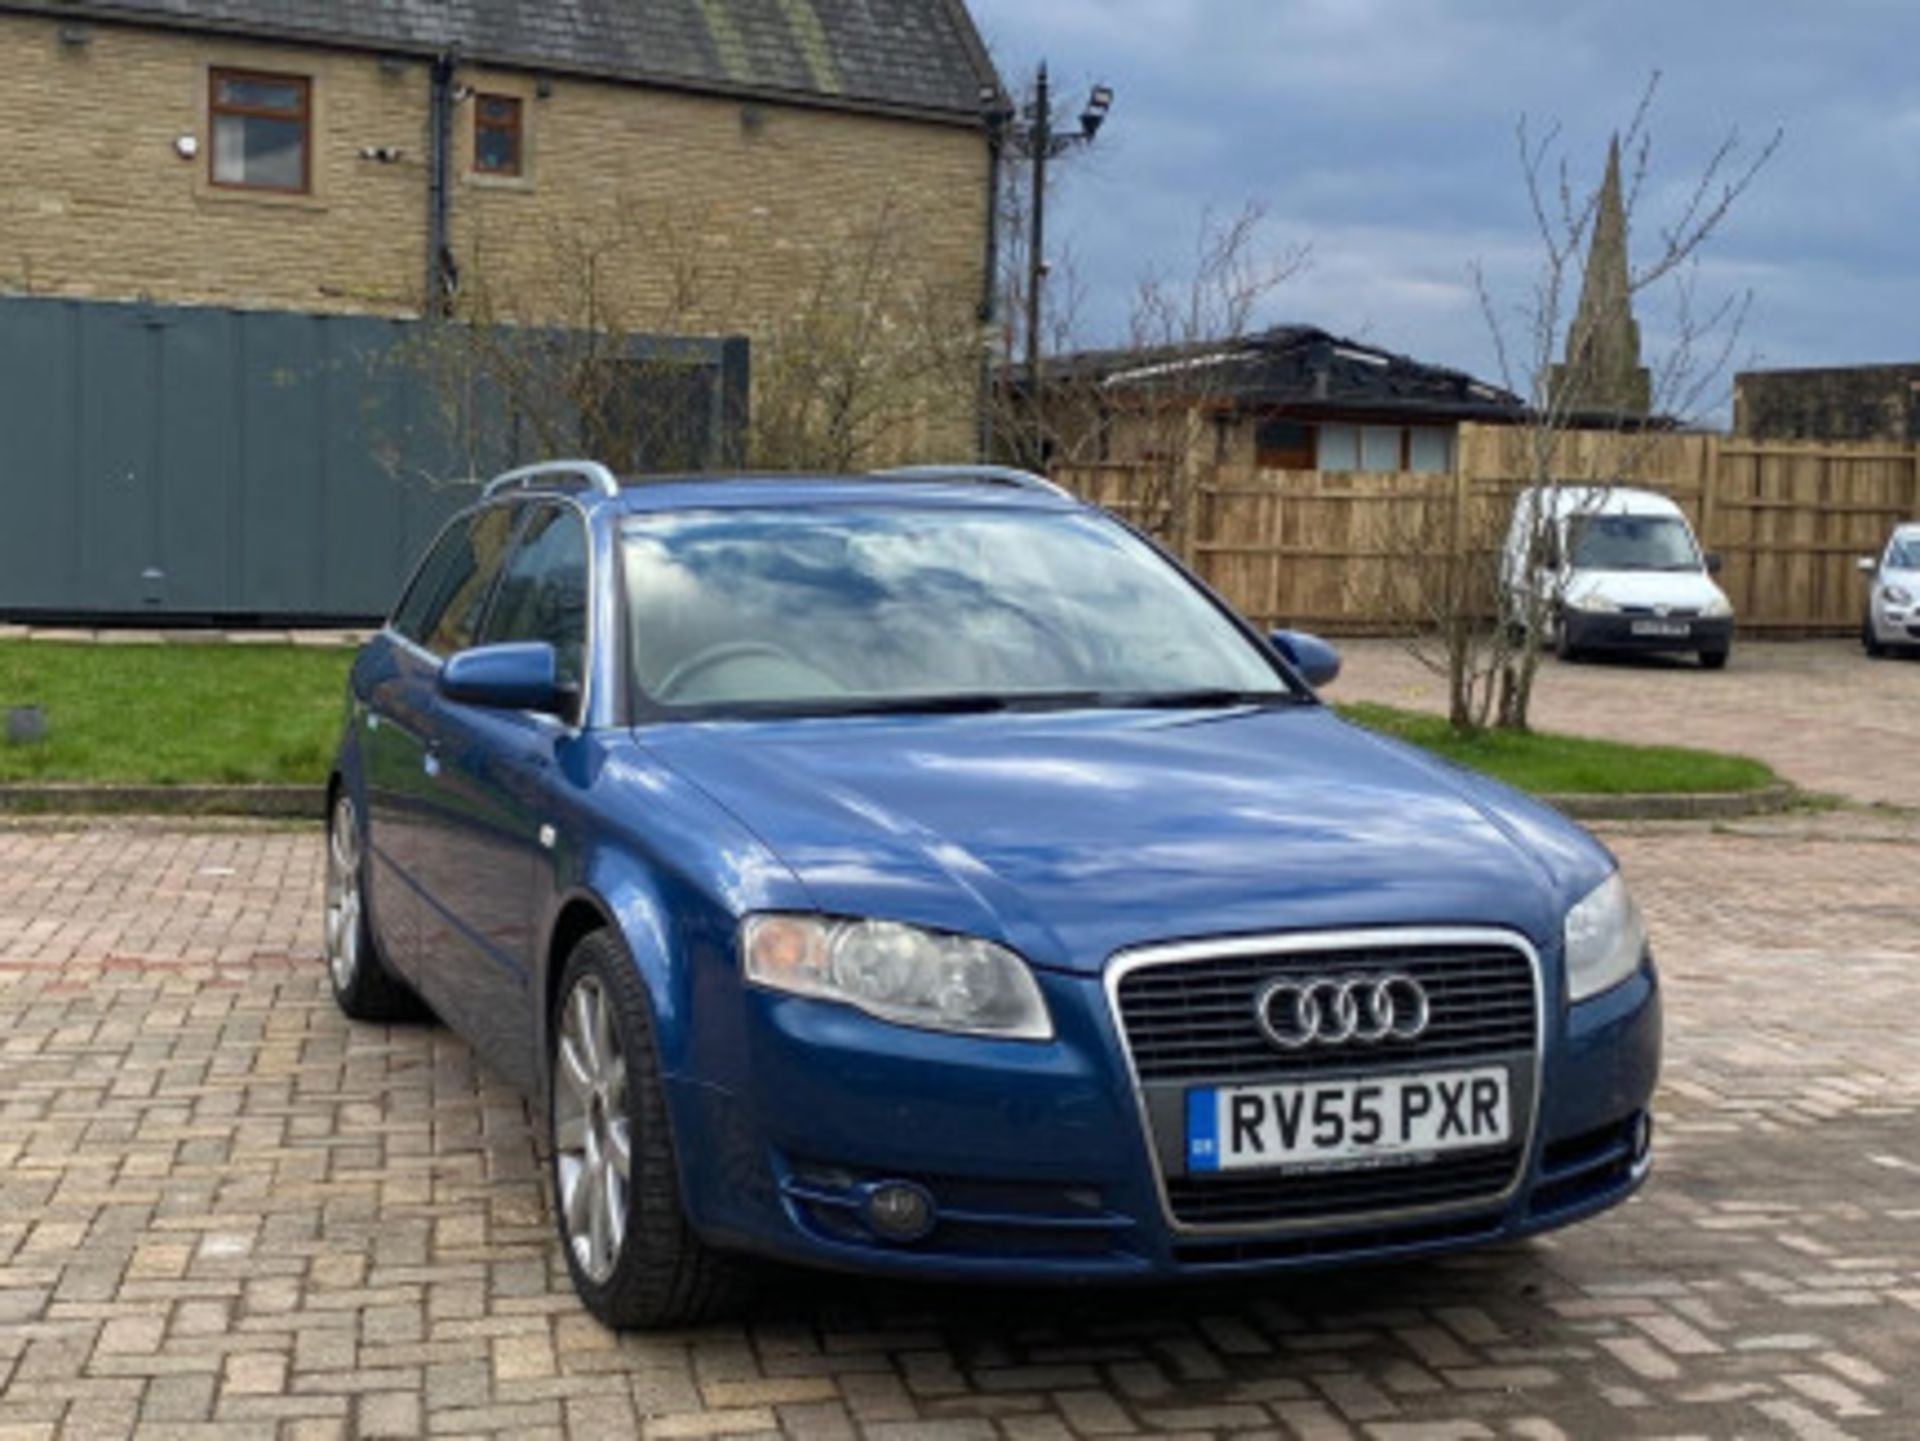 AUDI A4 AVANT 1.9 TDI SE 5DR ESTATE - RARE AND RELIABLE LUXURY WAGON >>--NO VAT ON HAMMER--<< - Image 40 of 97